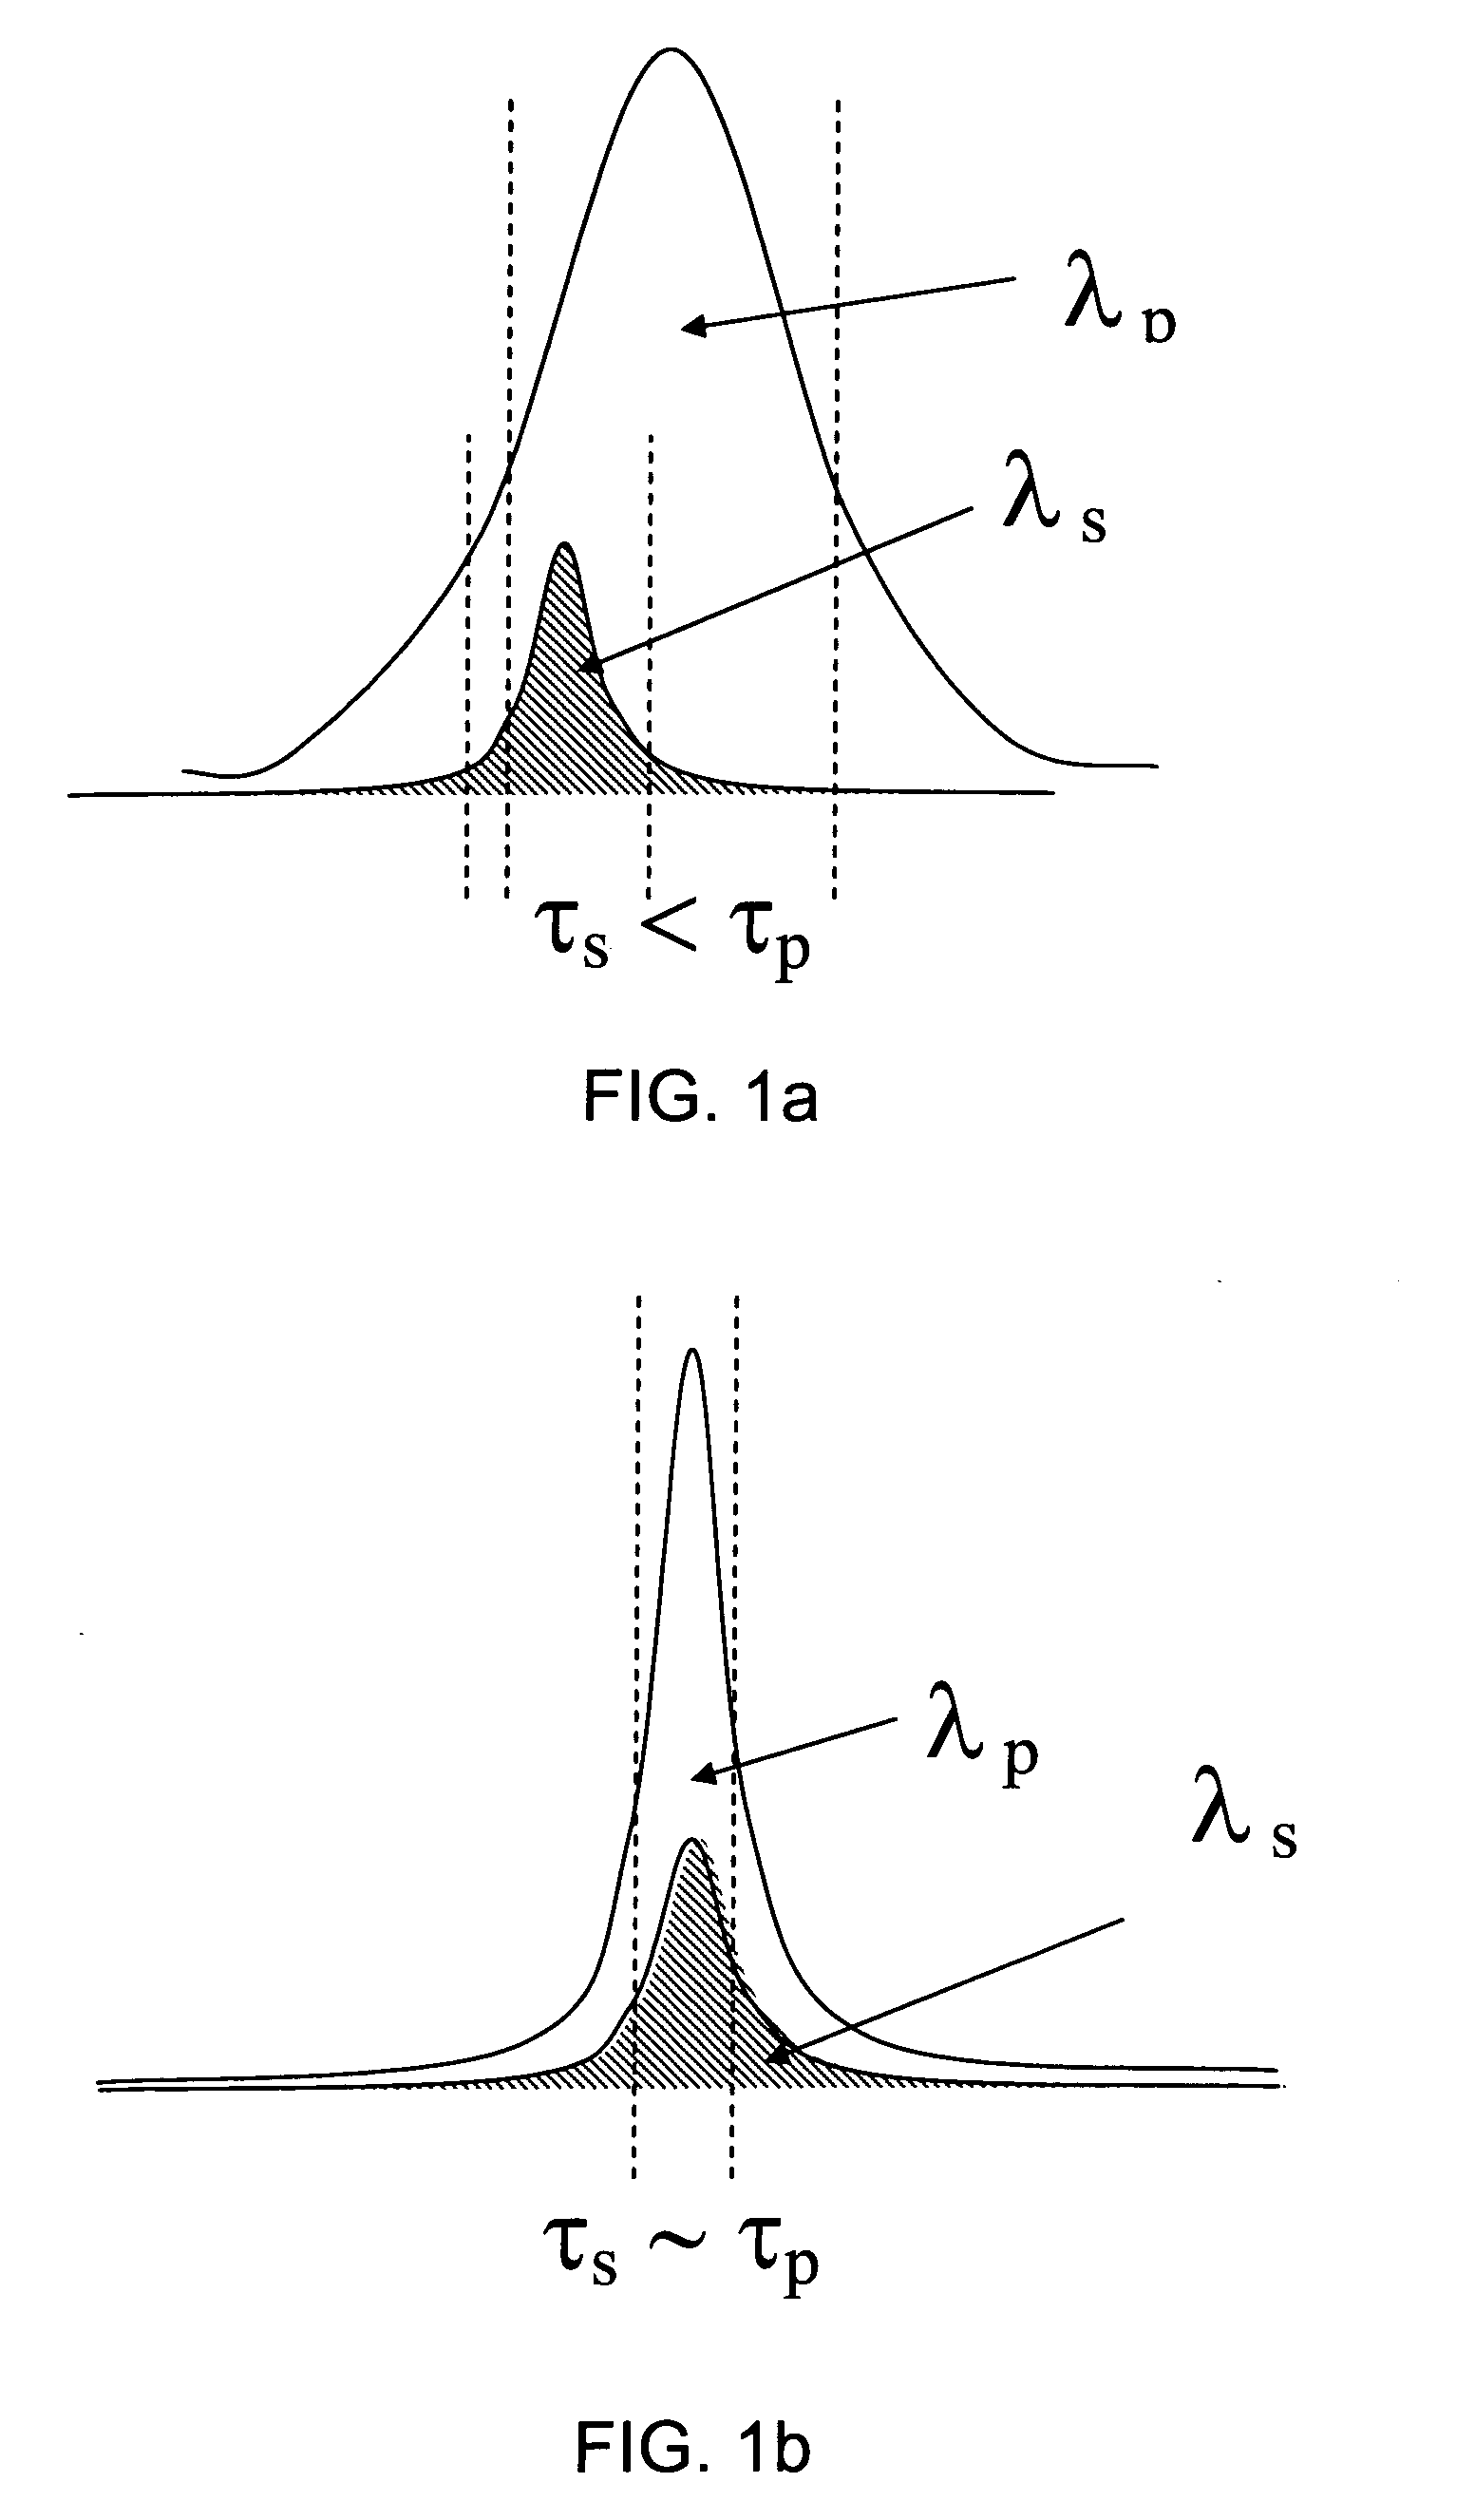 Method and apparatus for high power optical amplification in the infrared wavelength range (0.7-20 mum)